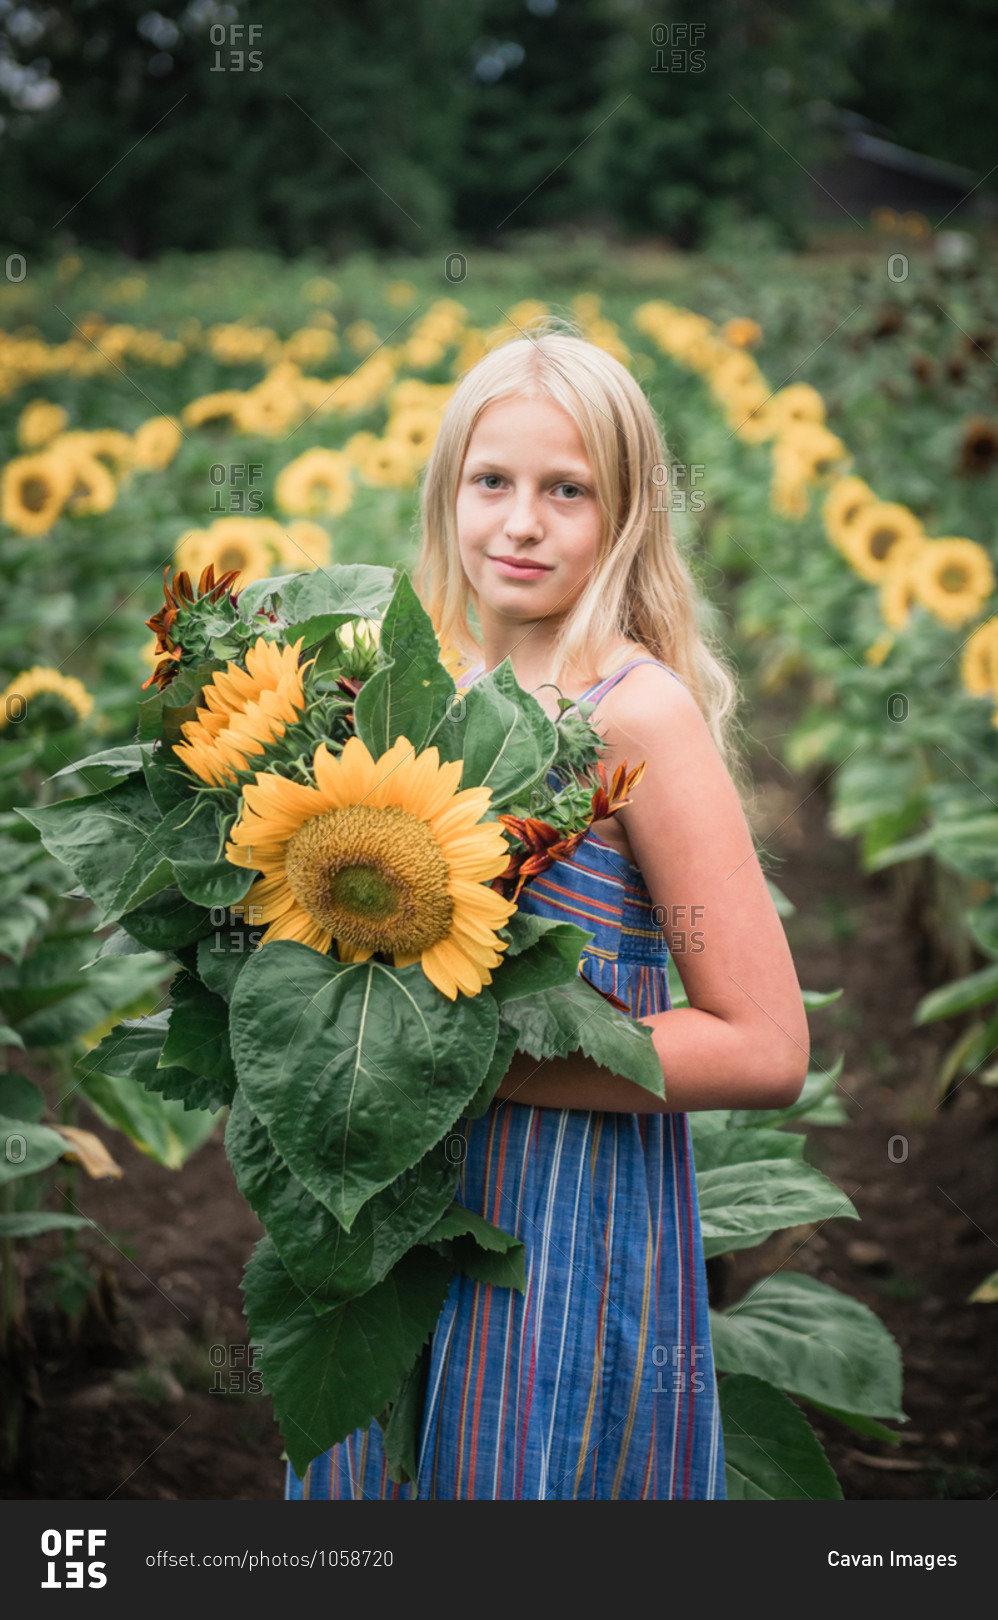 Young Girl Holding Red and Yellow Sunflowers in a Sunflower Field